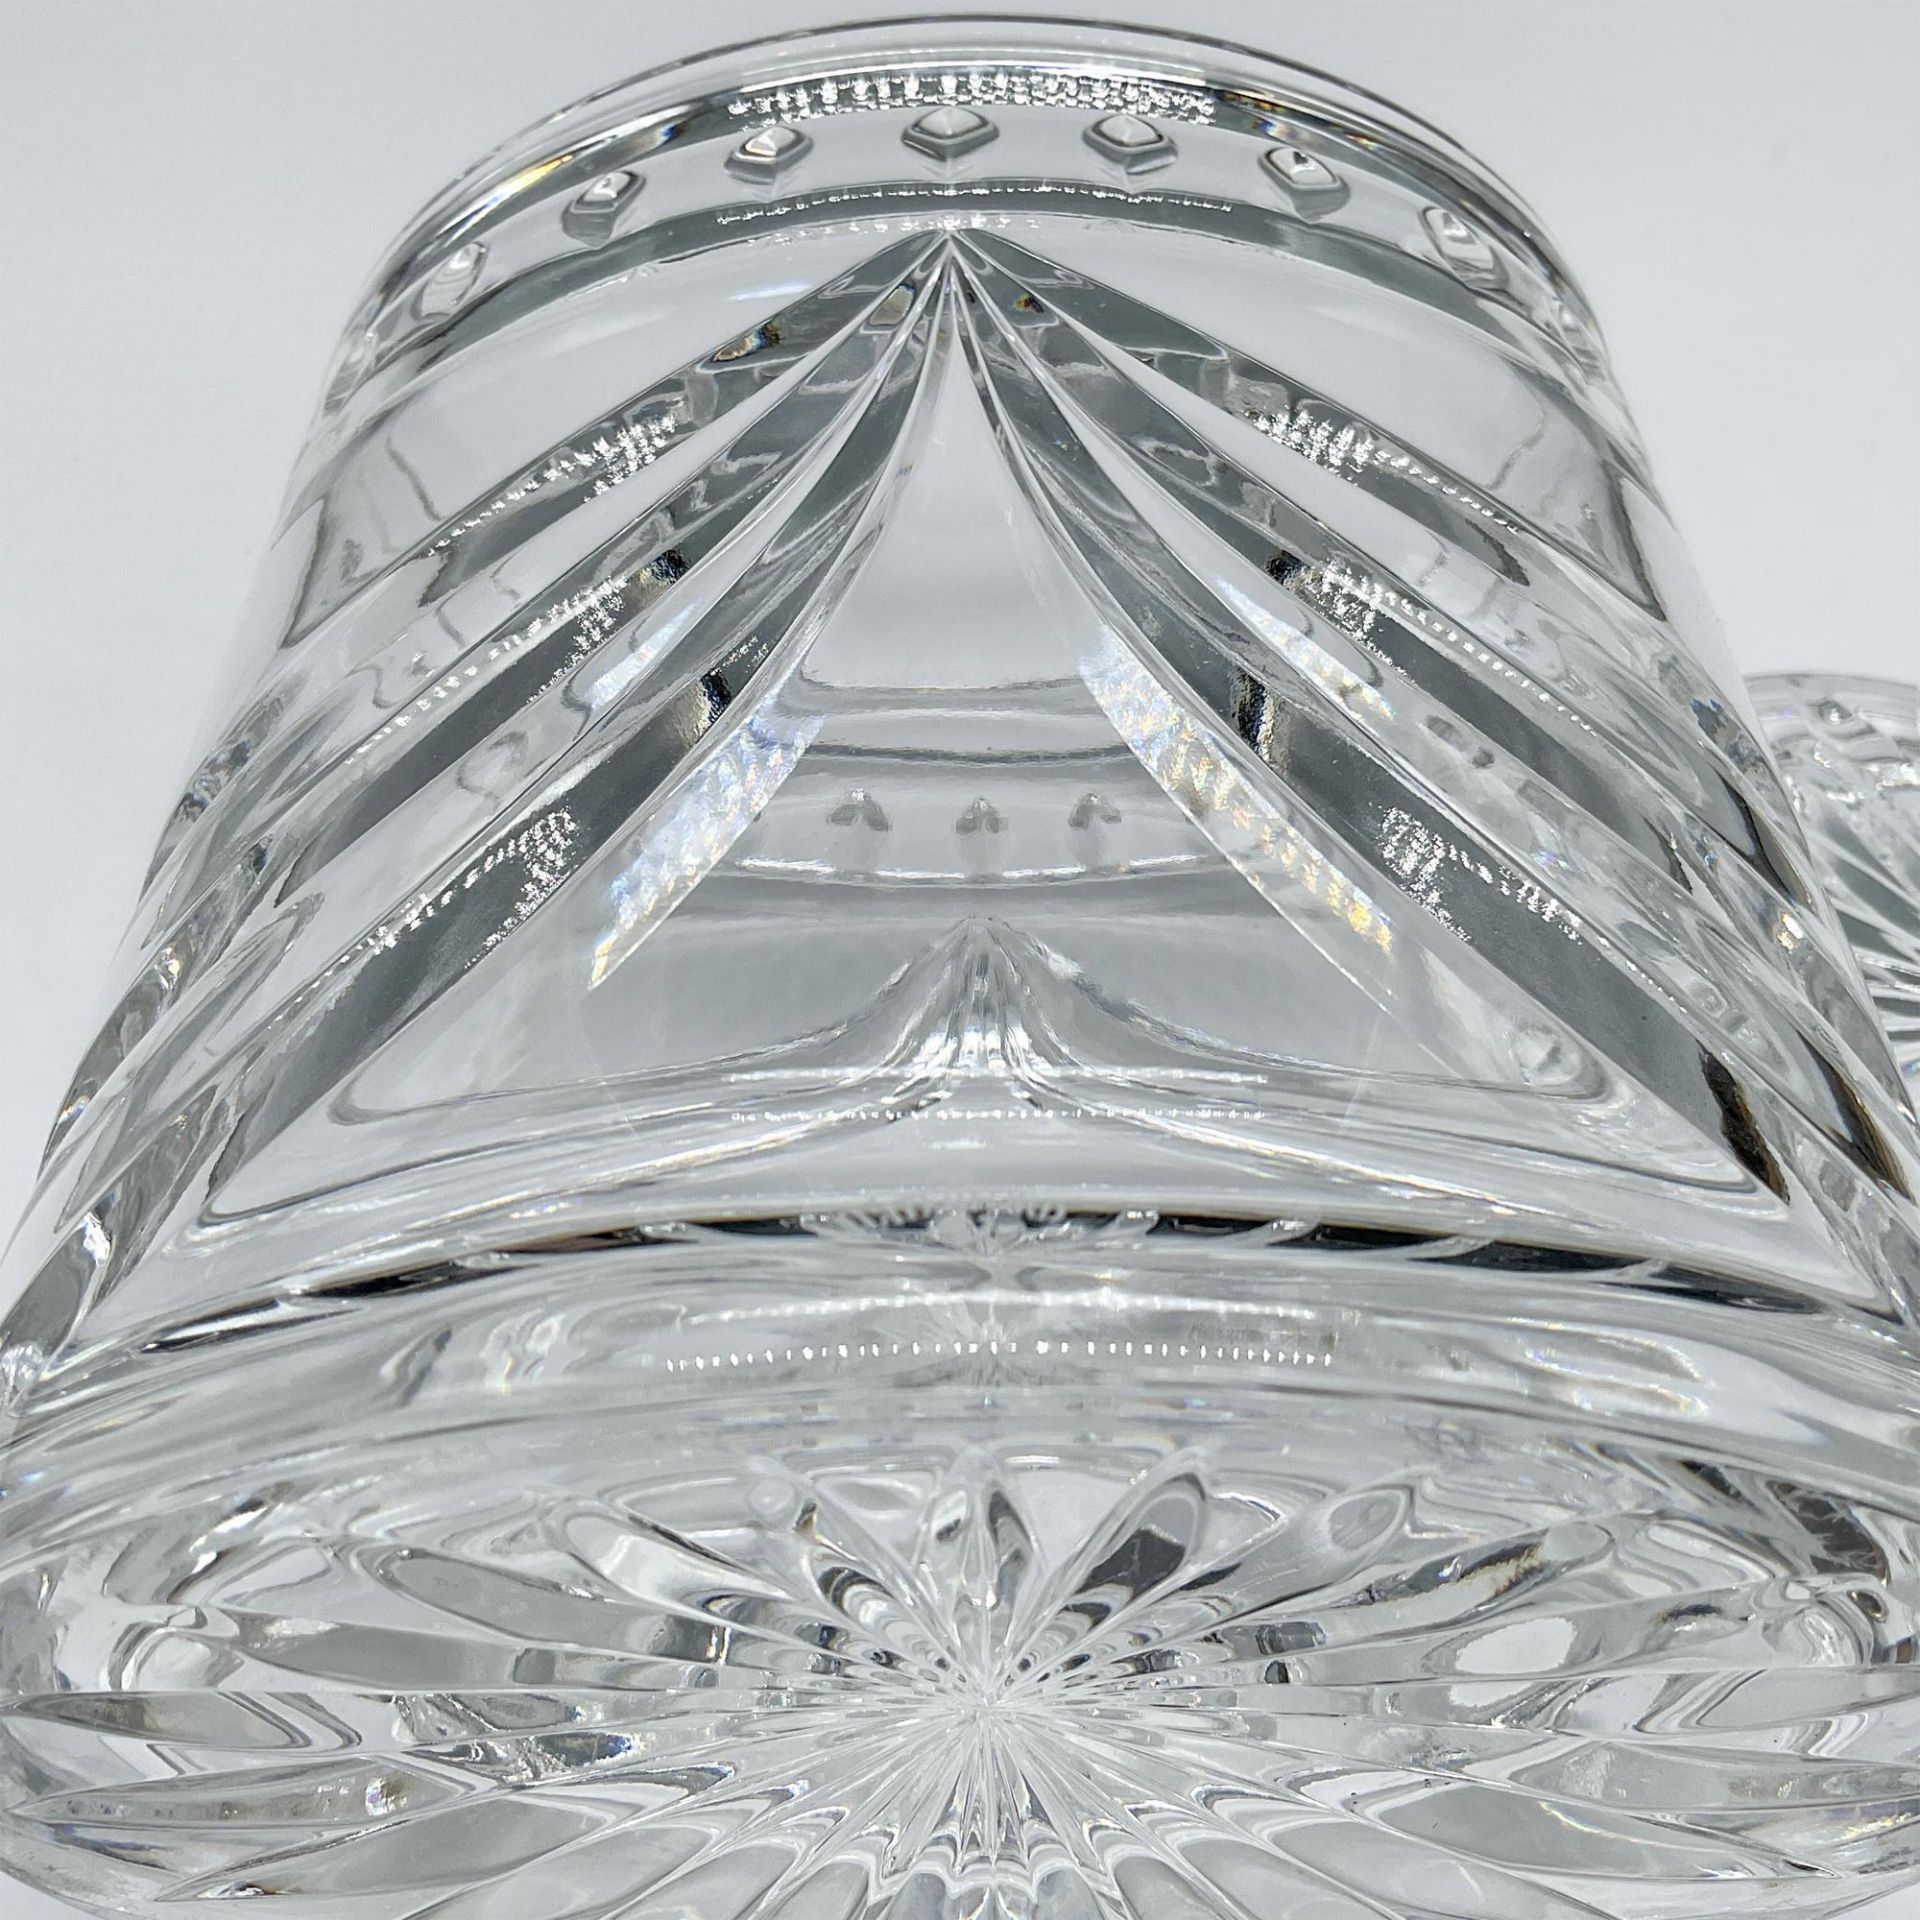 Waterford Crystal Oval Shaped Cookie Jar, Overture Pattern - Image 4 of 4